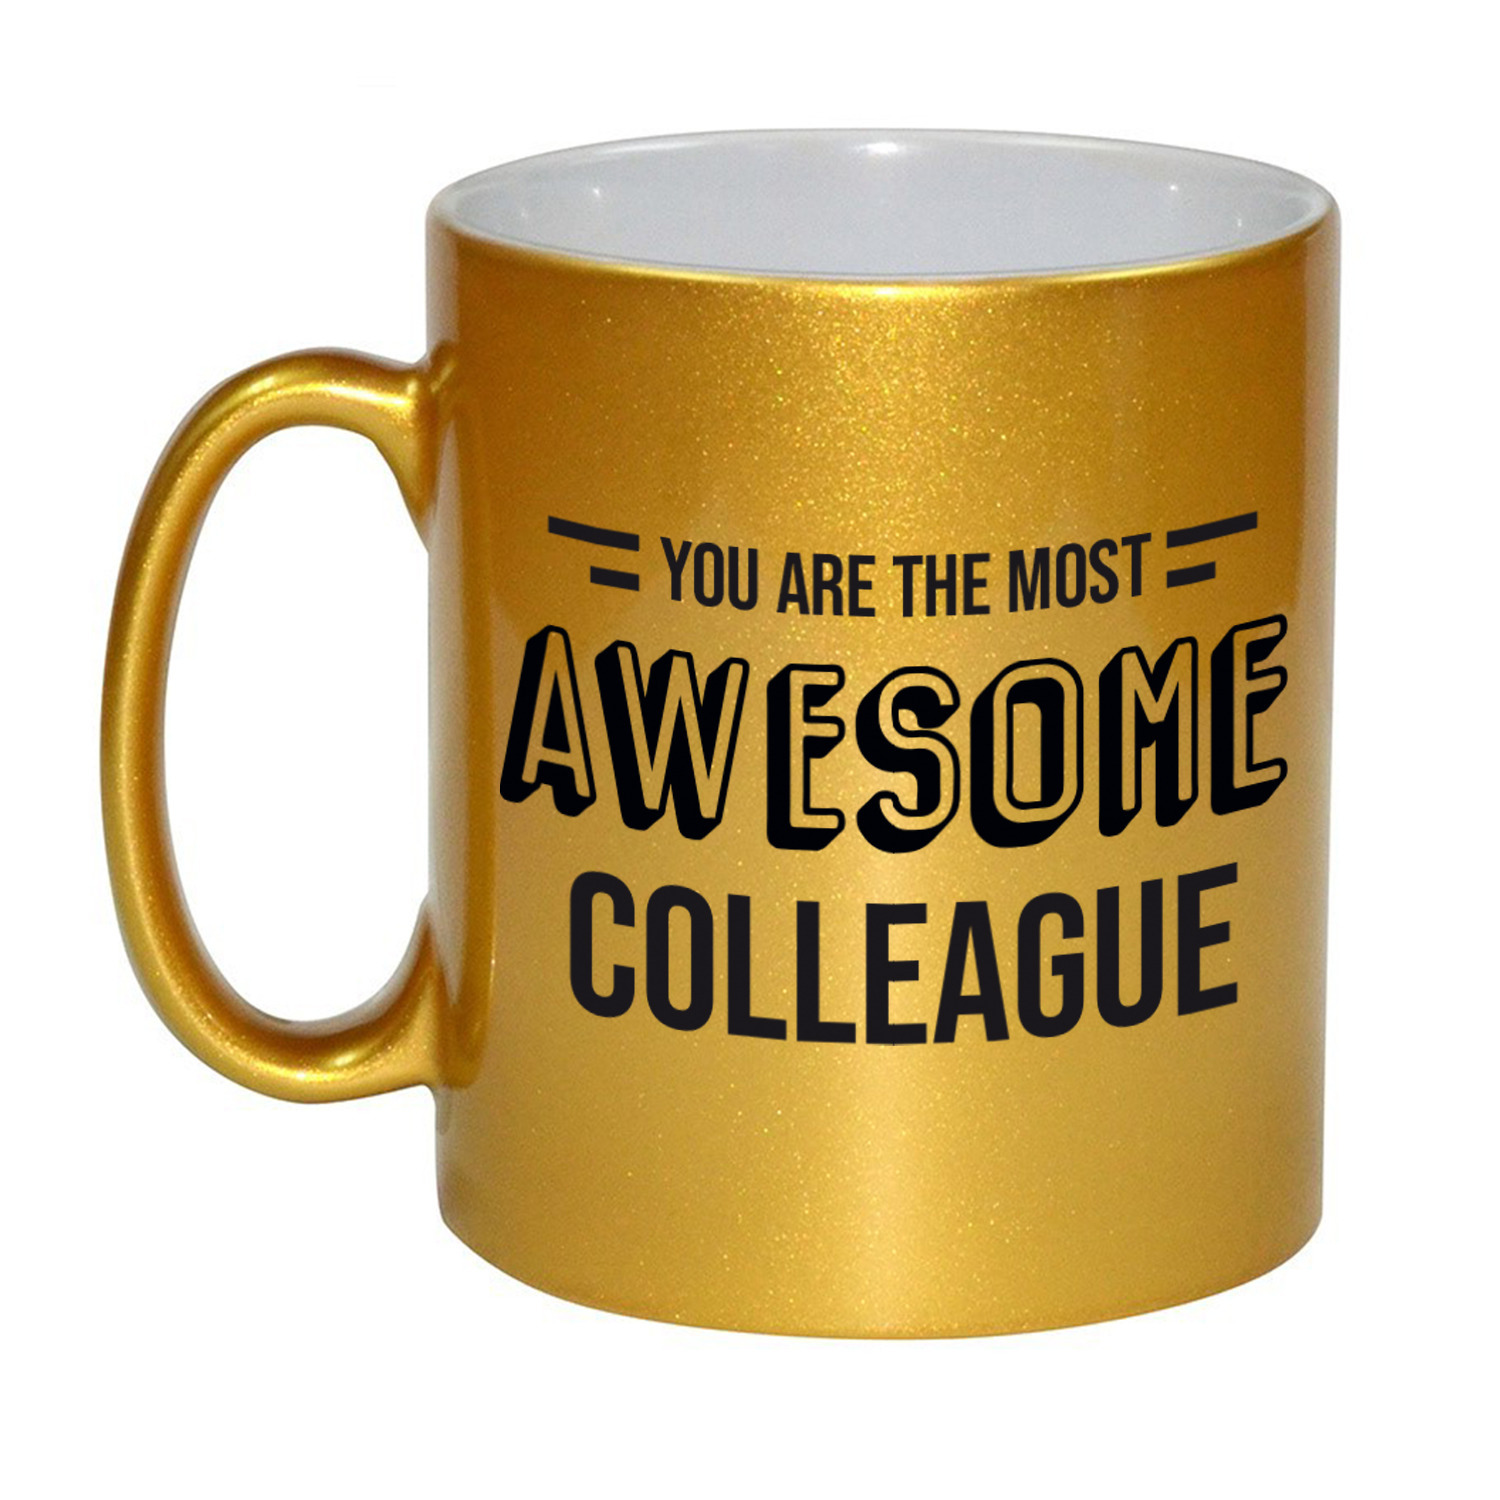 1x stuks personeel-collega cadeau gouden mok-you are the most awesome colleague